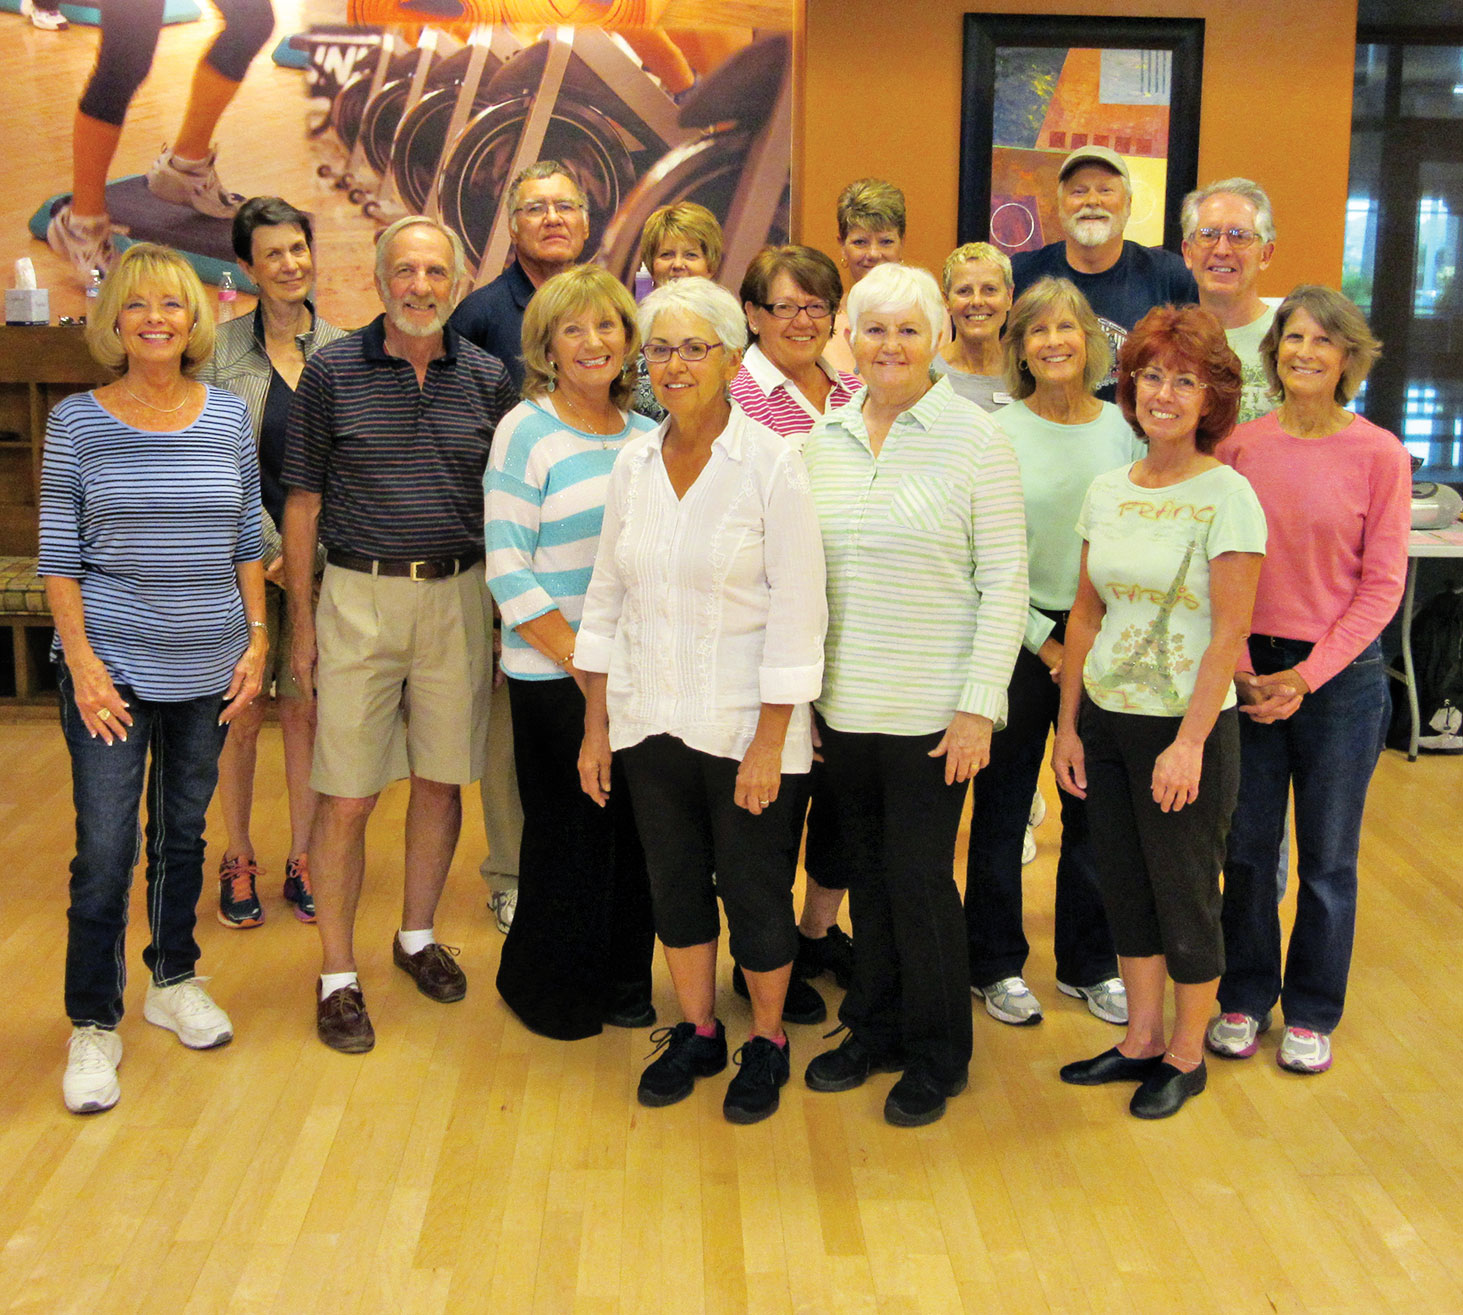 Many new dances are being learned by this intrepid group of SaddleBrooke Ranch residents this year. Line dance lessons with Rebecca are year-round in the Hacienda aerobics room. Fun, fun, fun!